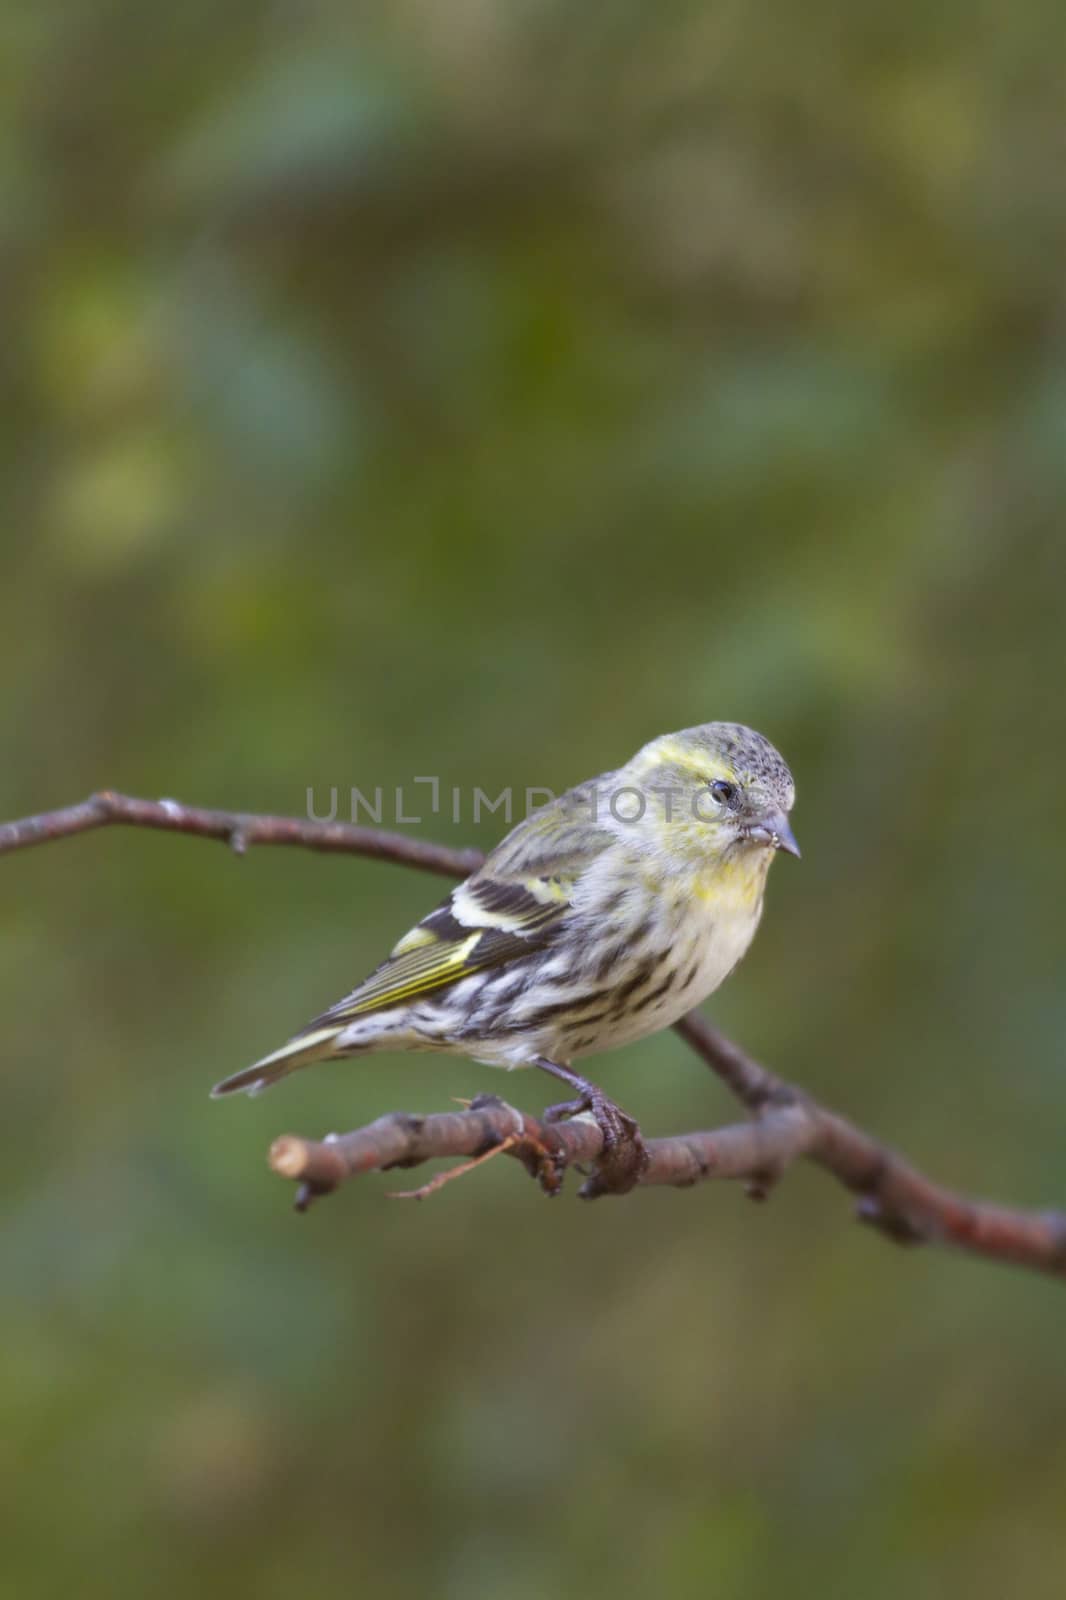 siskin perched on a branch in the UK